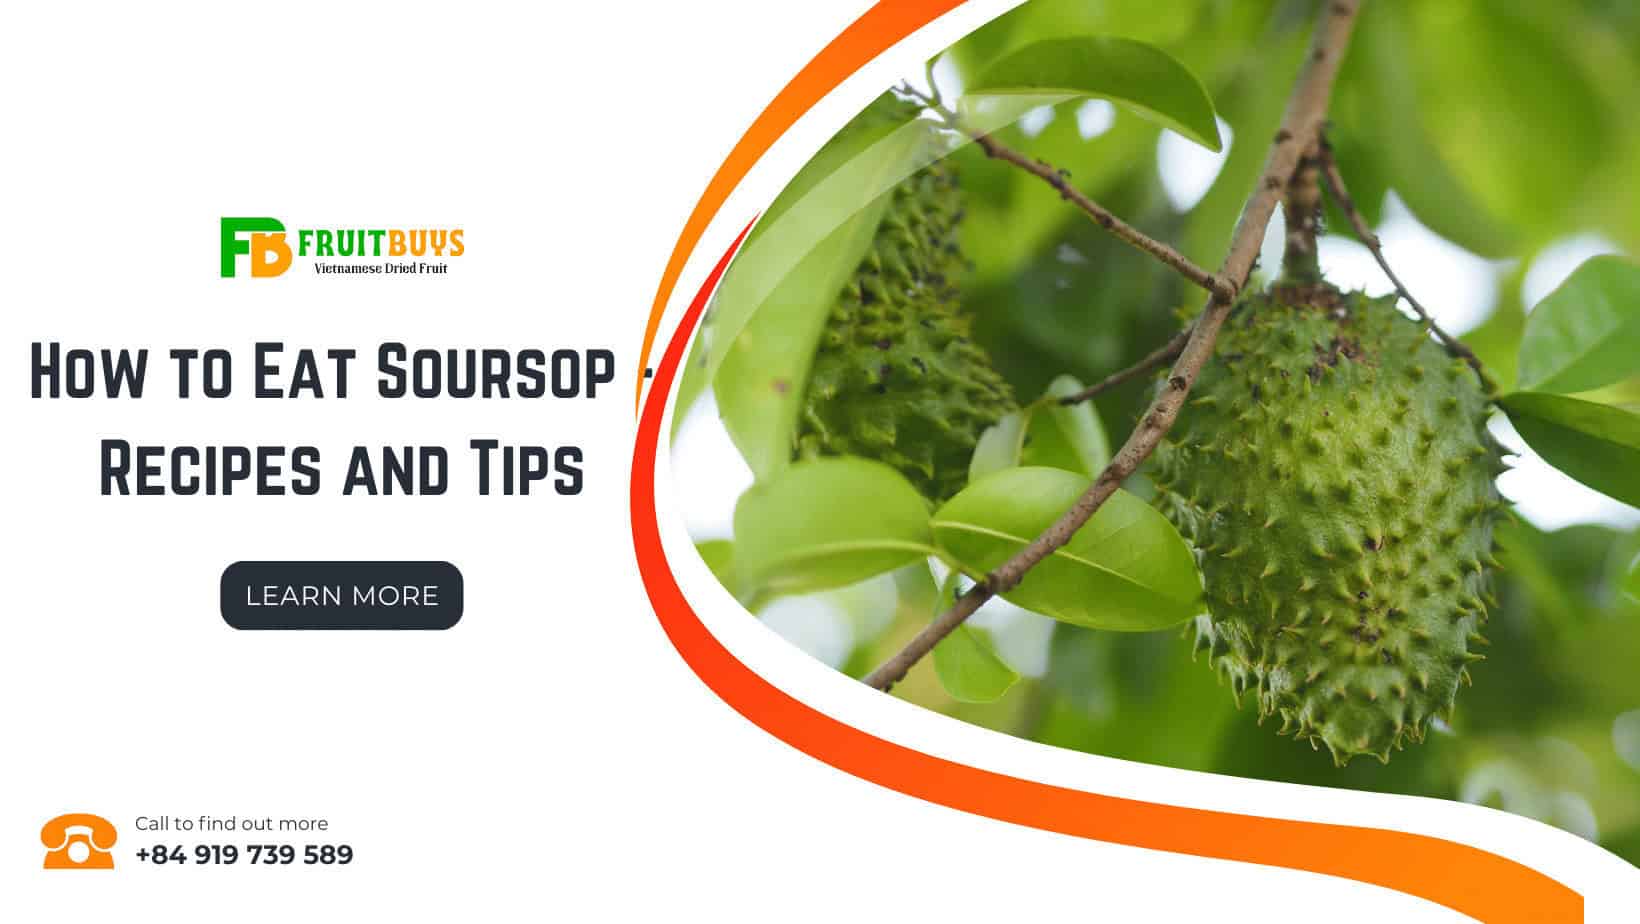 FruitBuys Vietnam  How To Eat Soursop   Recipes And Tips